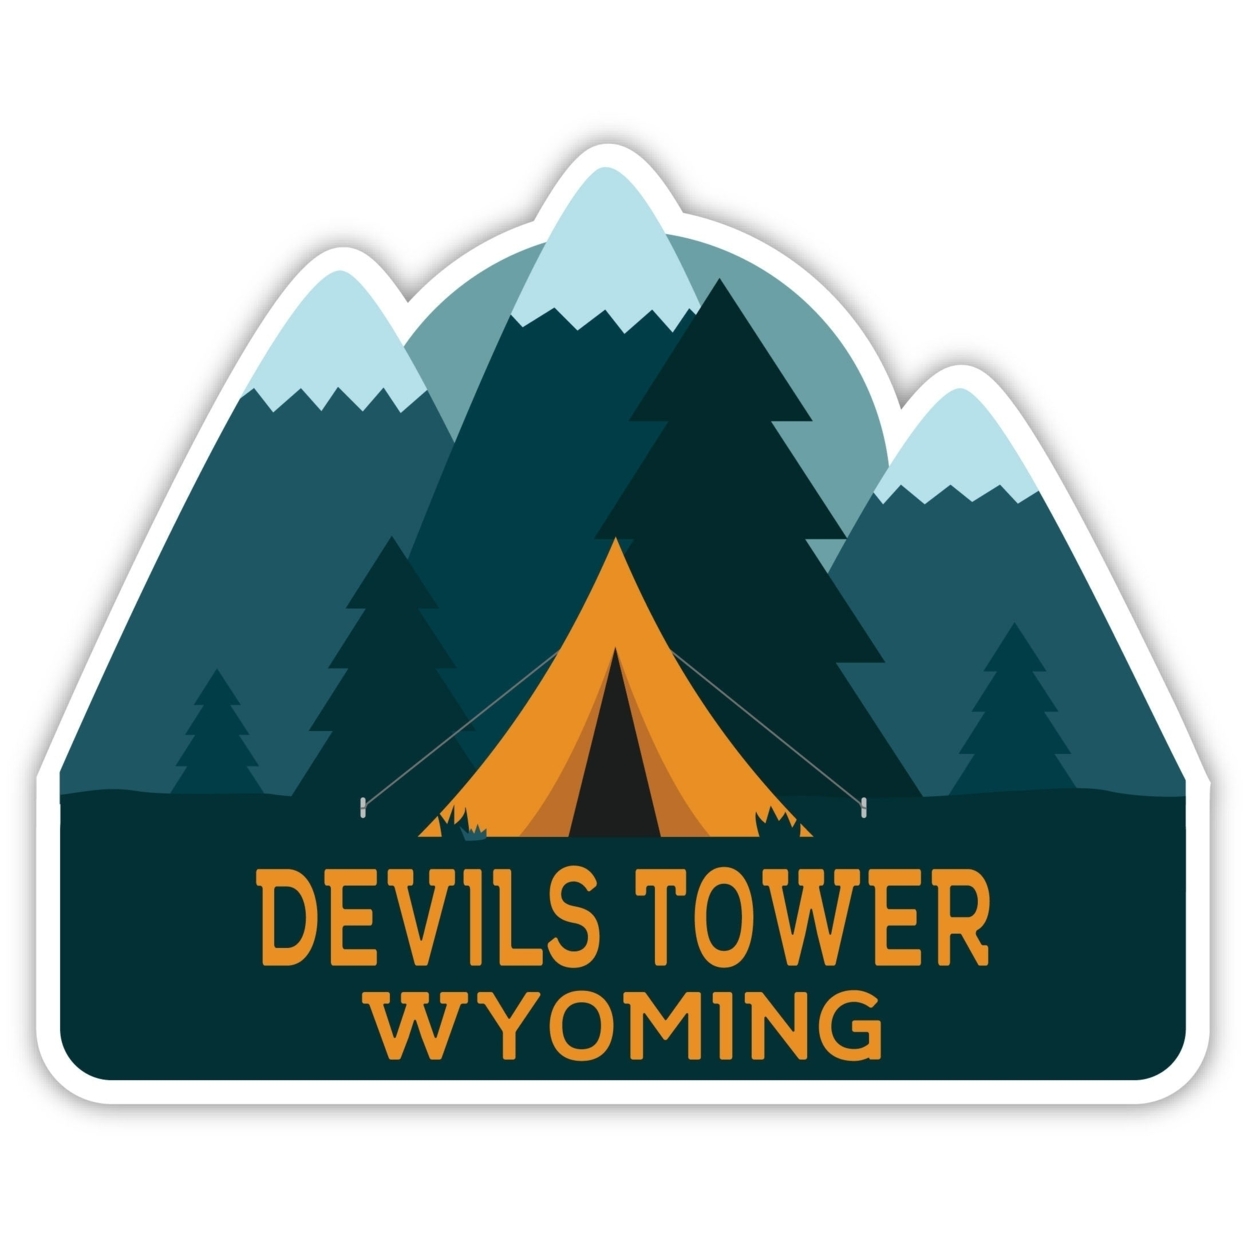 Devils Tower Wyoming Souvenir Decorative Stickers (Choose Theme And Size) - 4-Pack, 8-Inch, Bear